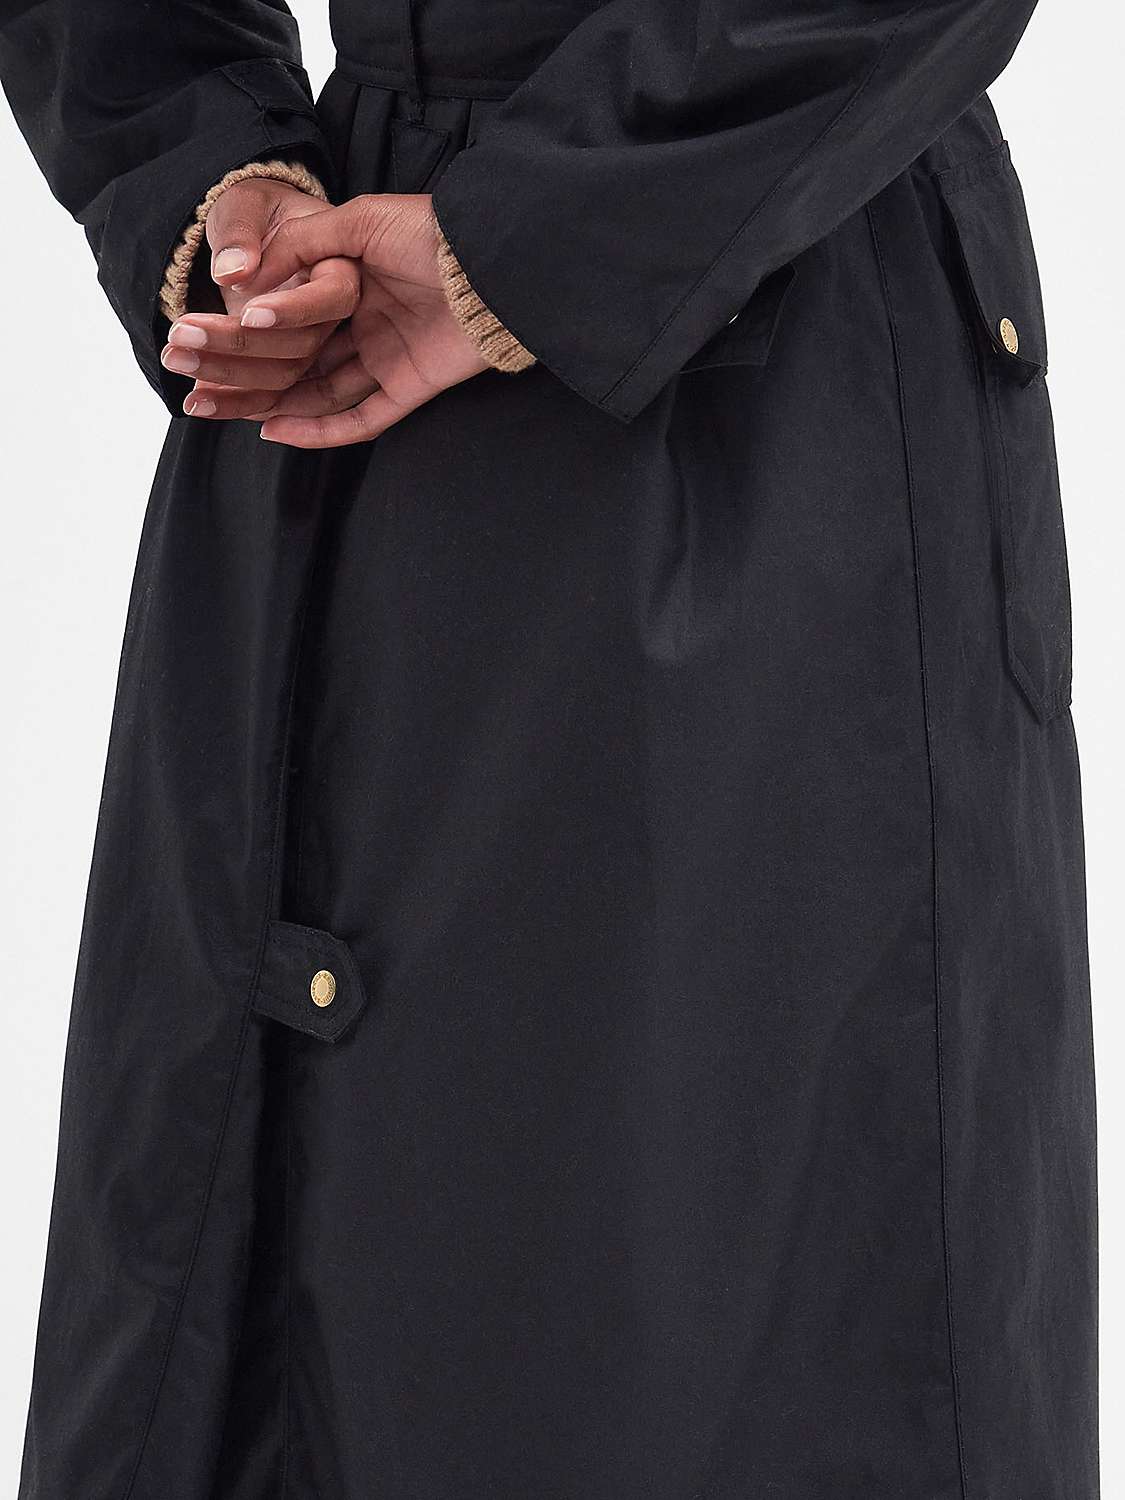 Buy Barbour Tomorrow's Archive Manderston Wax Trench Coat, Black Online at johnlewis.com